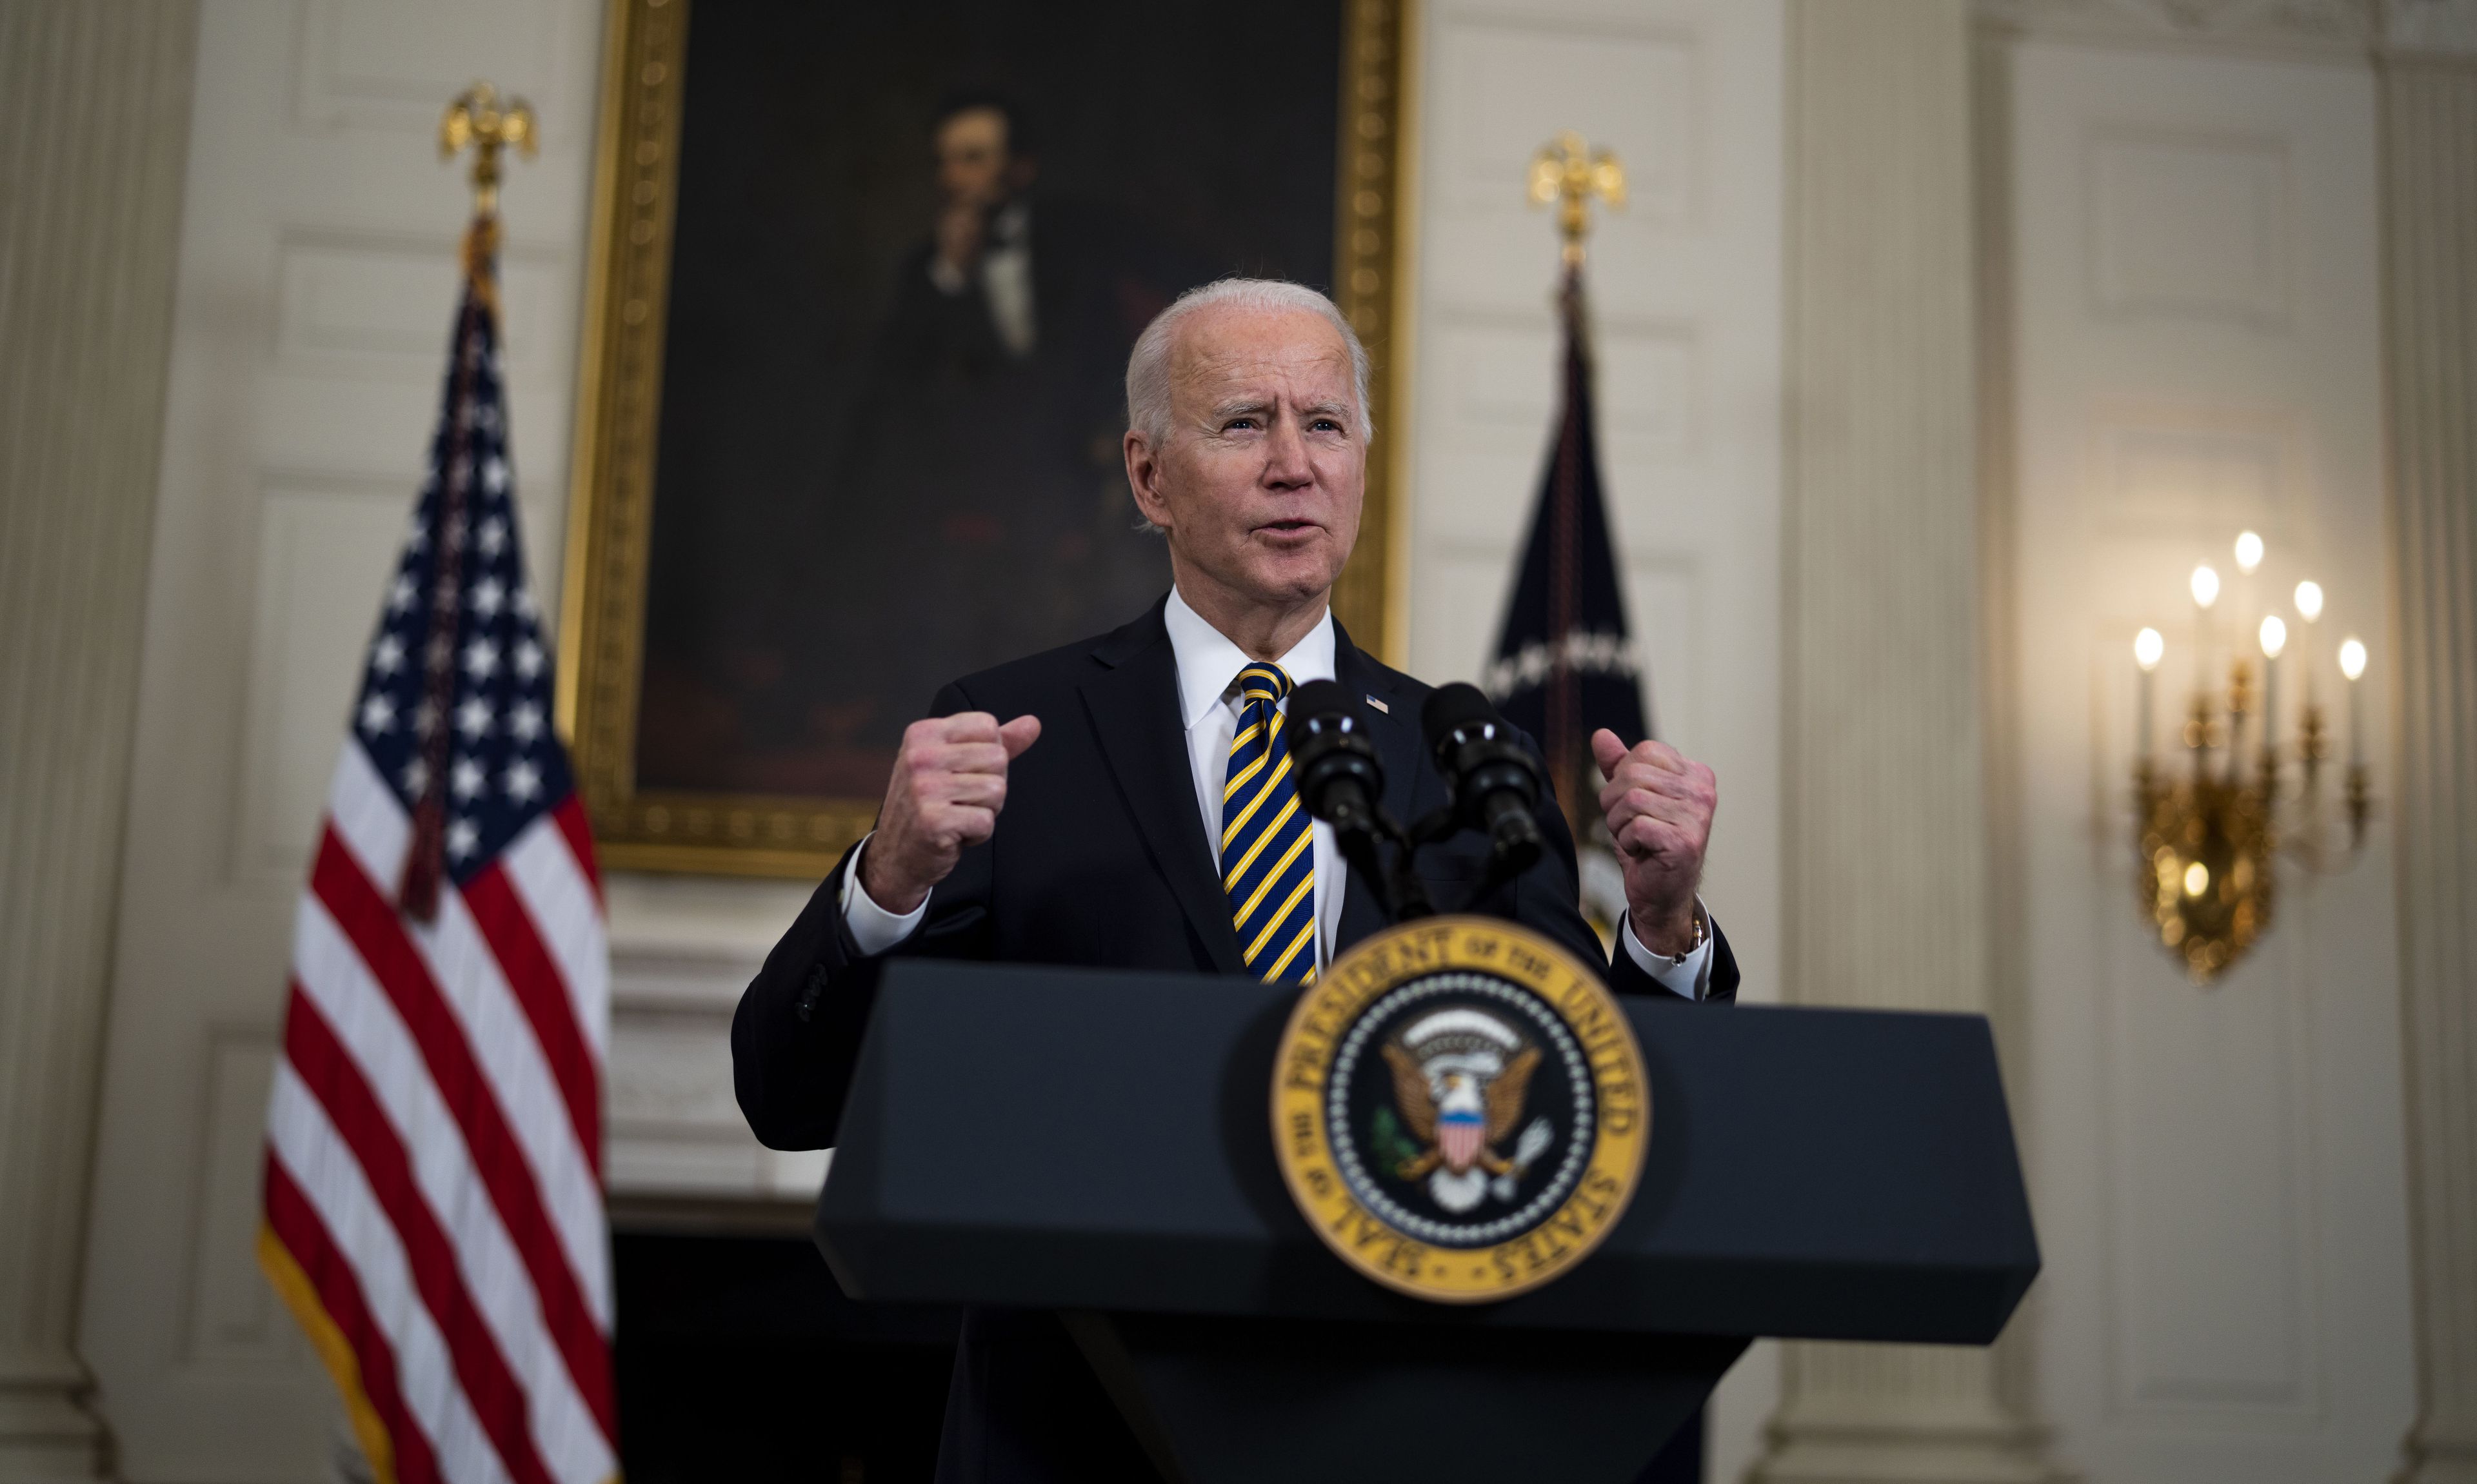 WASHINGTON, DC &#8211; FEBRUARY 24: U.S. President Joe Biden speaks at an event to sign an Executive Order on the economy with Vice President Kamala Harris February 24, 2021 in the State Dining Room of the White House in Washington, DC. The order is intended to address a global shortage of semiconductors, or computer chips, as well as a multi-secto...